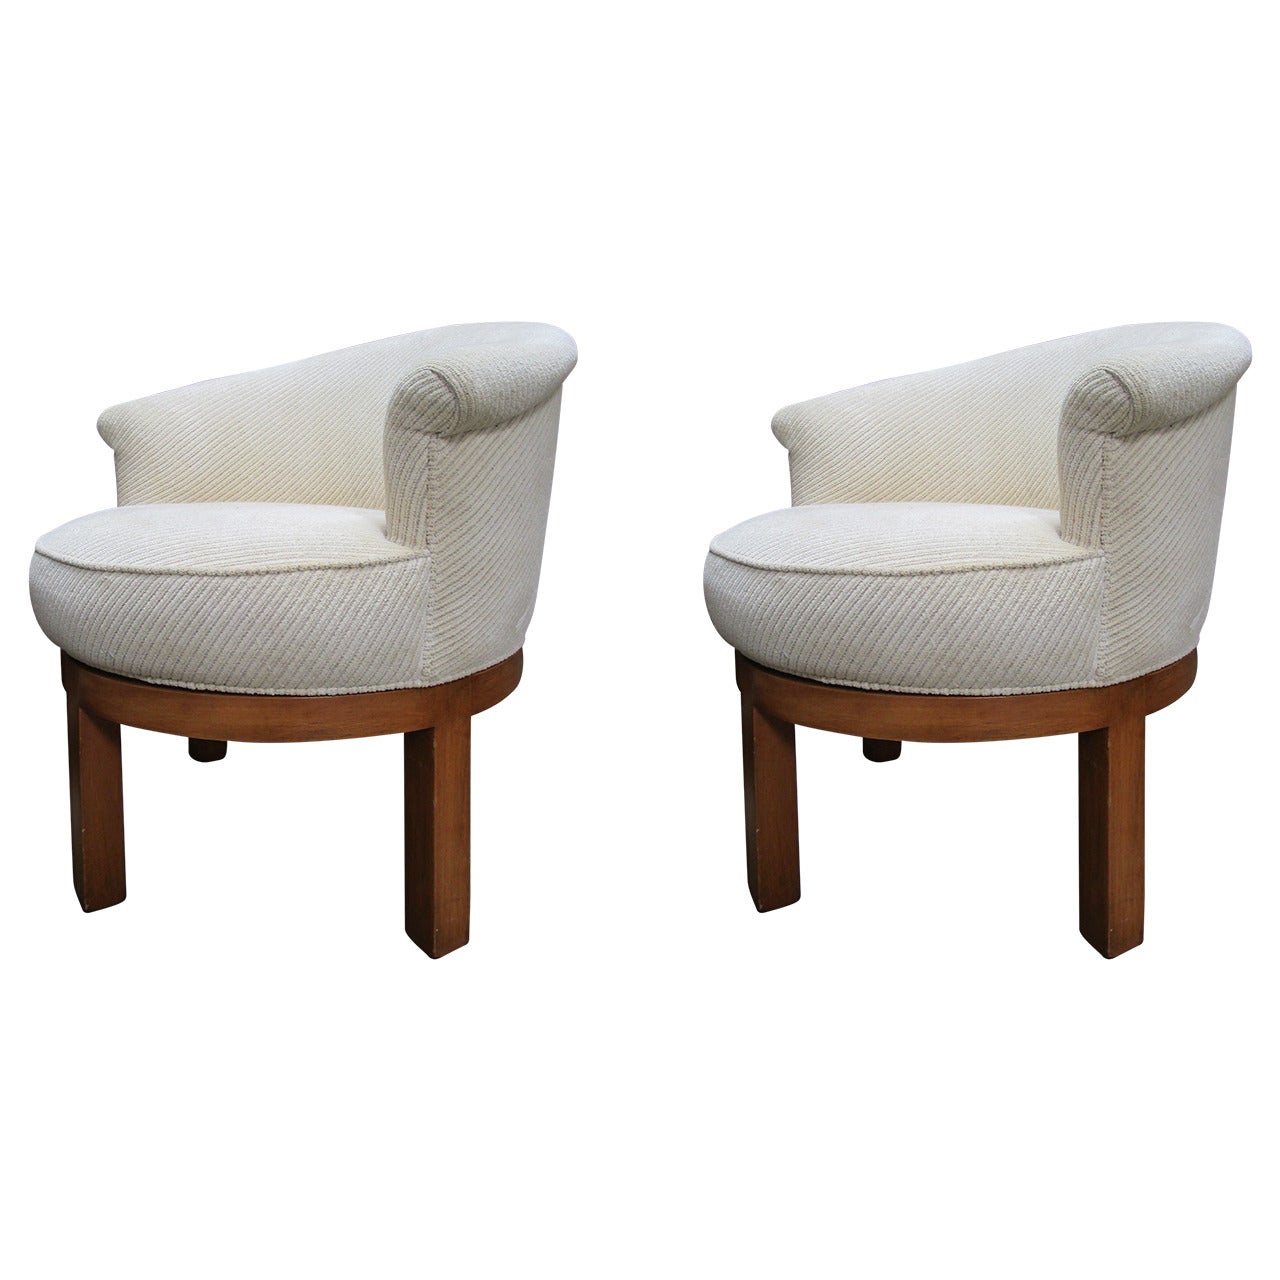 Pair of Off-White Corduroy Swivel  Chairs by Harvey Probber